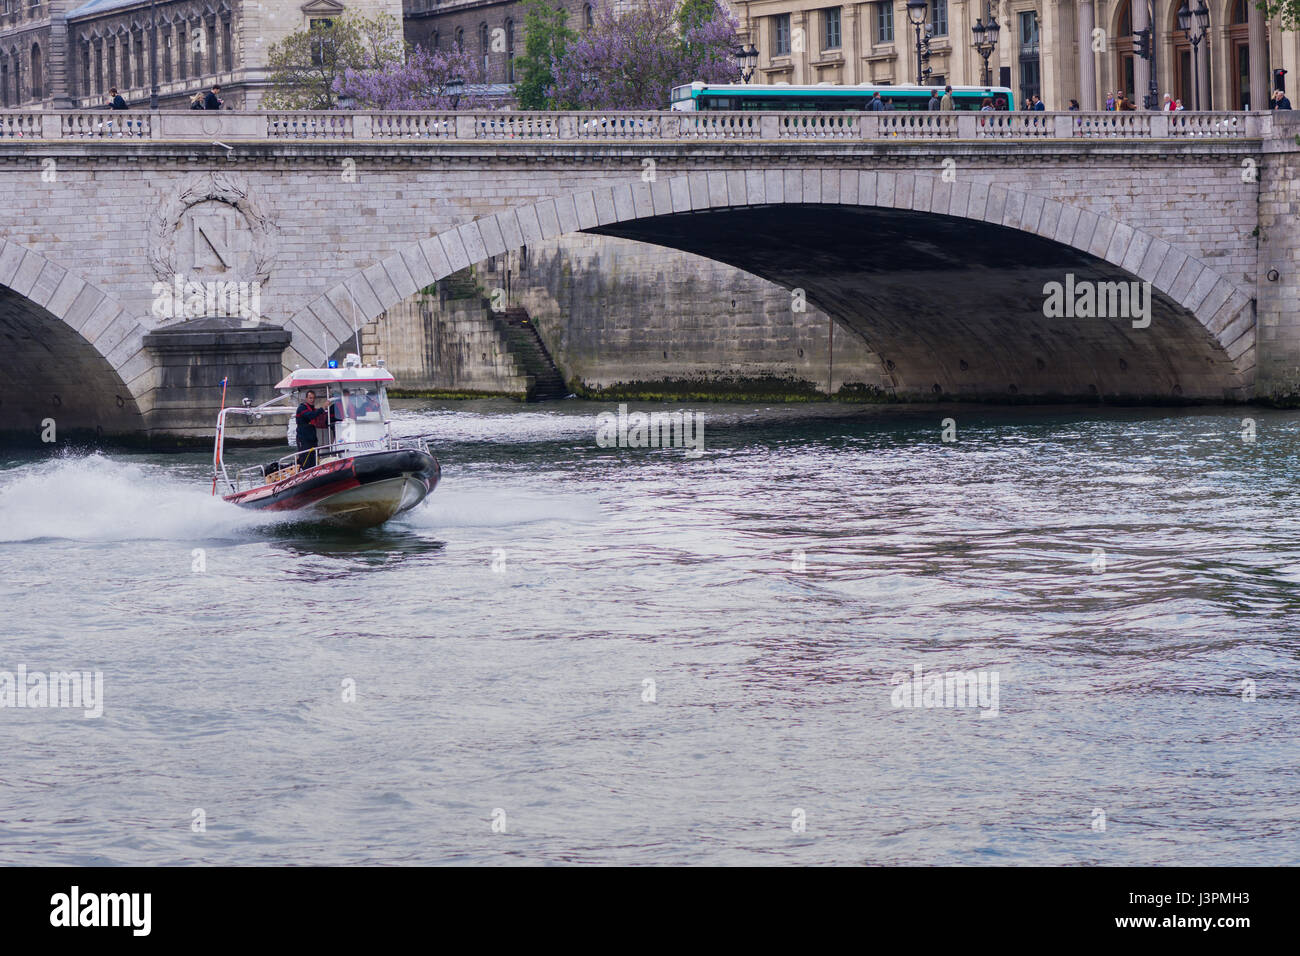 A firefighters' rescue boat on the river Seine. Stock Photo